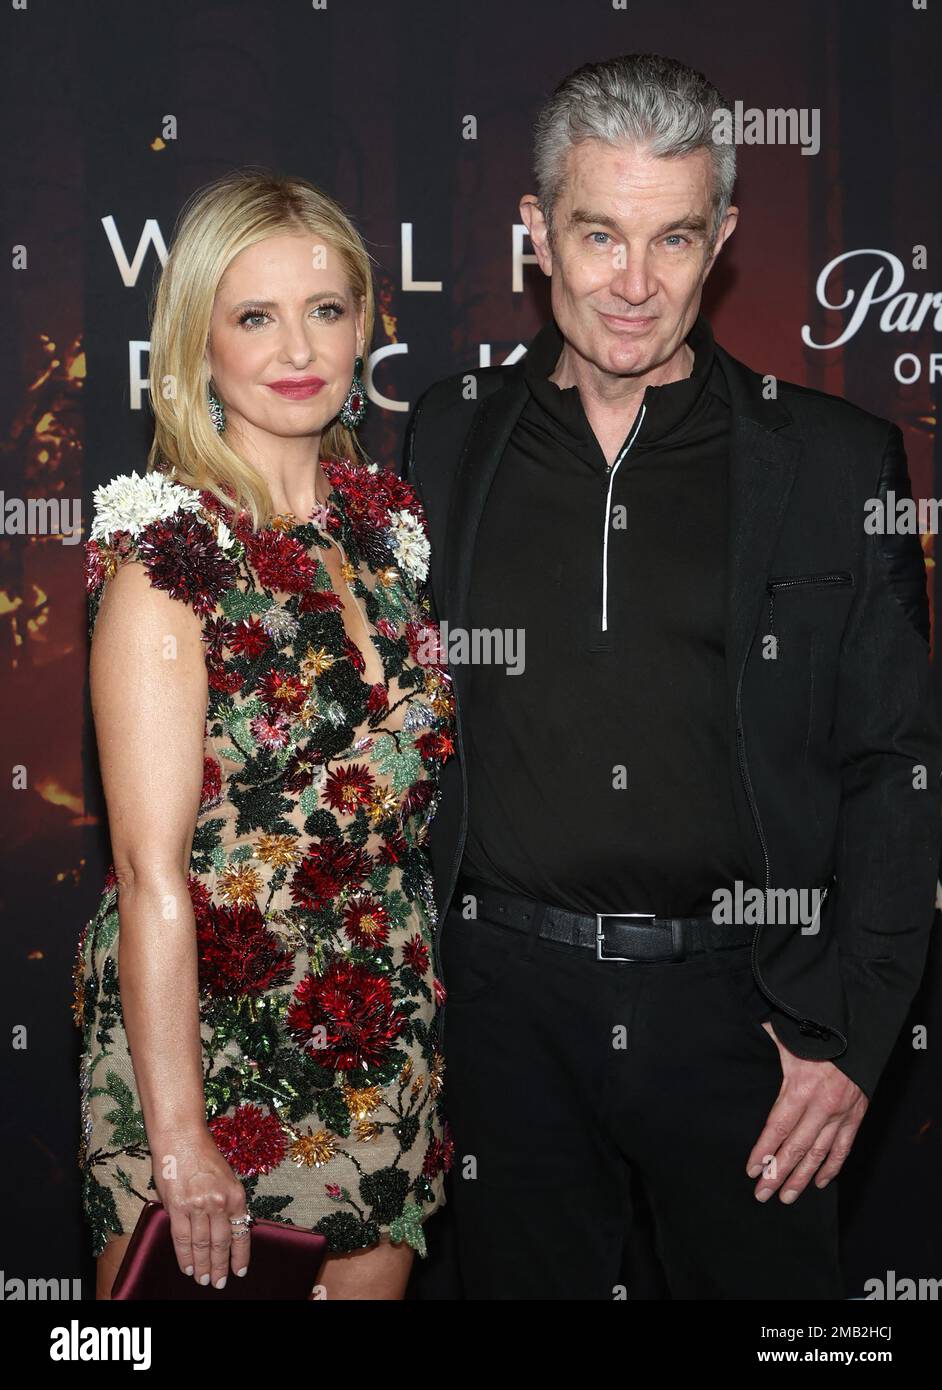 Sarah Michelle Gellar, James Marsters, at Los Angeles Premiere Of Paramount+'s "Wolf Pack" at Harmony Gold in os Angeles, CA, USA on January 19, 2022. Photo by Fati Sadou/ABACAPRESS.COM Credit: Abaca Press/Alamy Live News Stock Photo